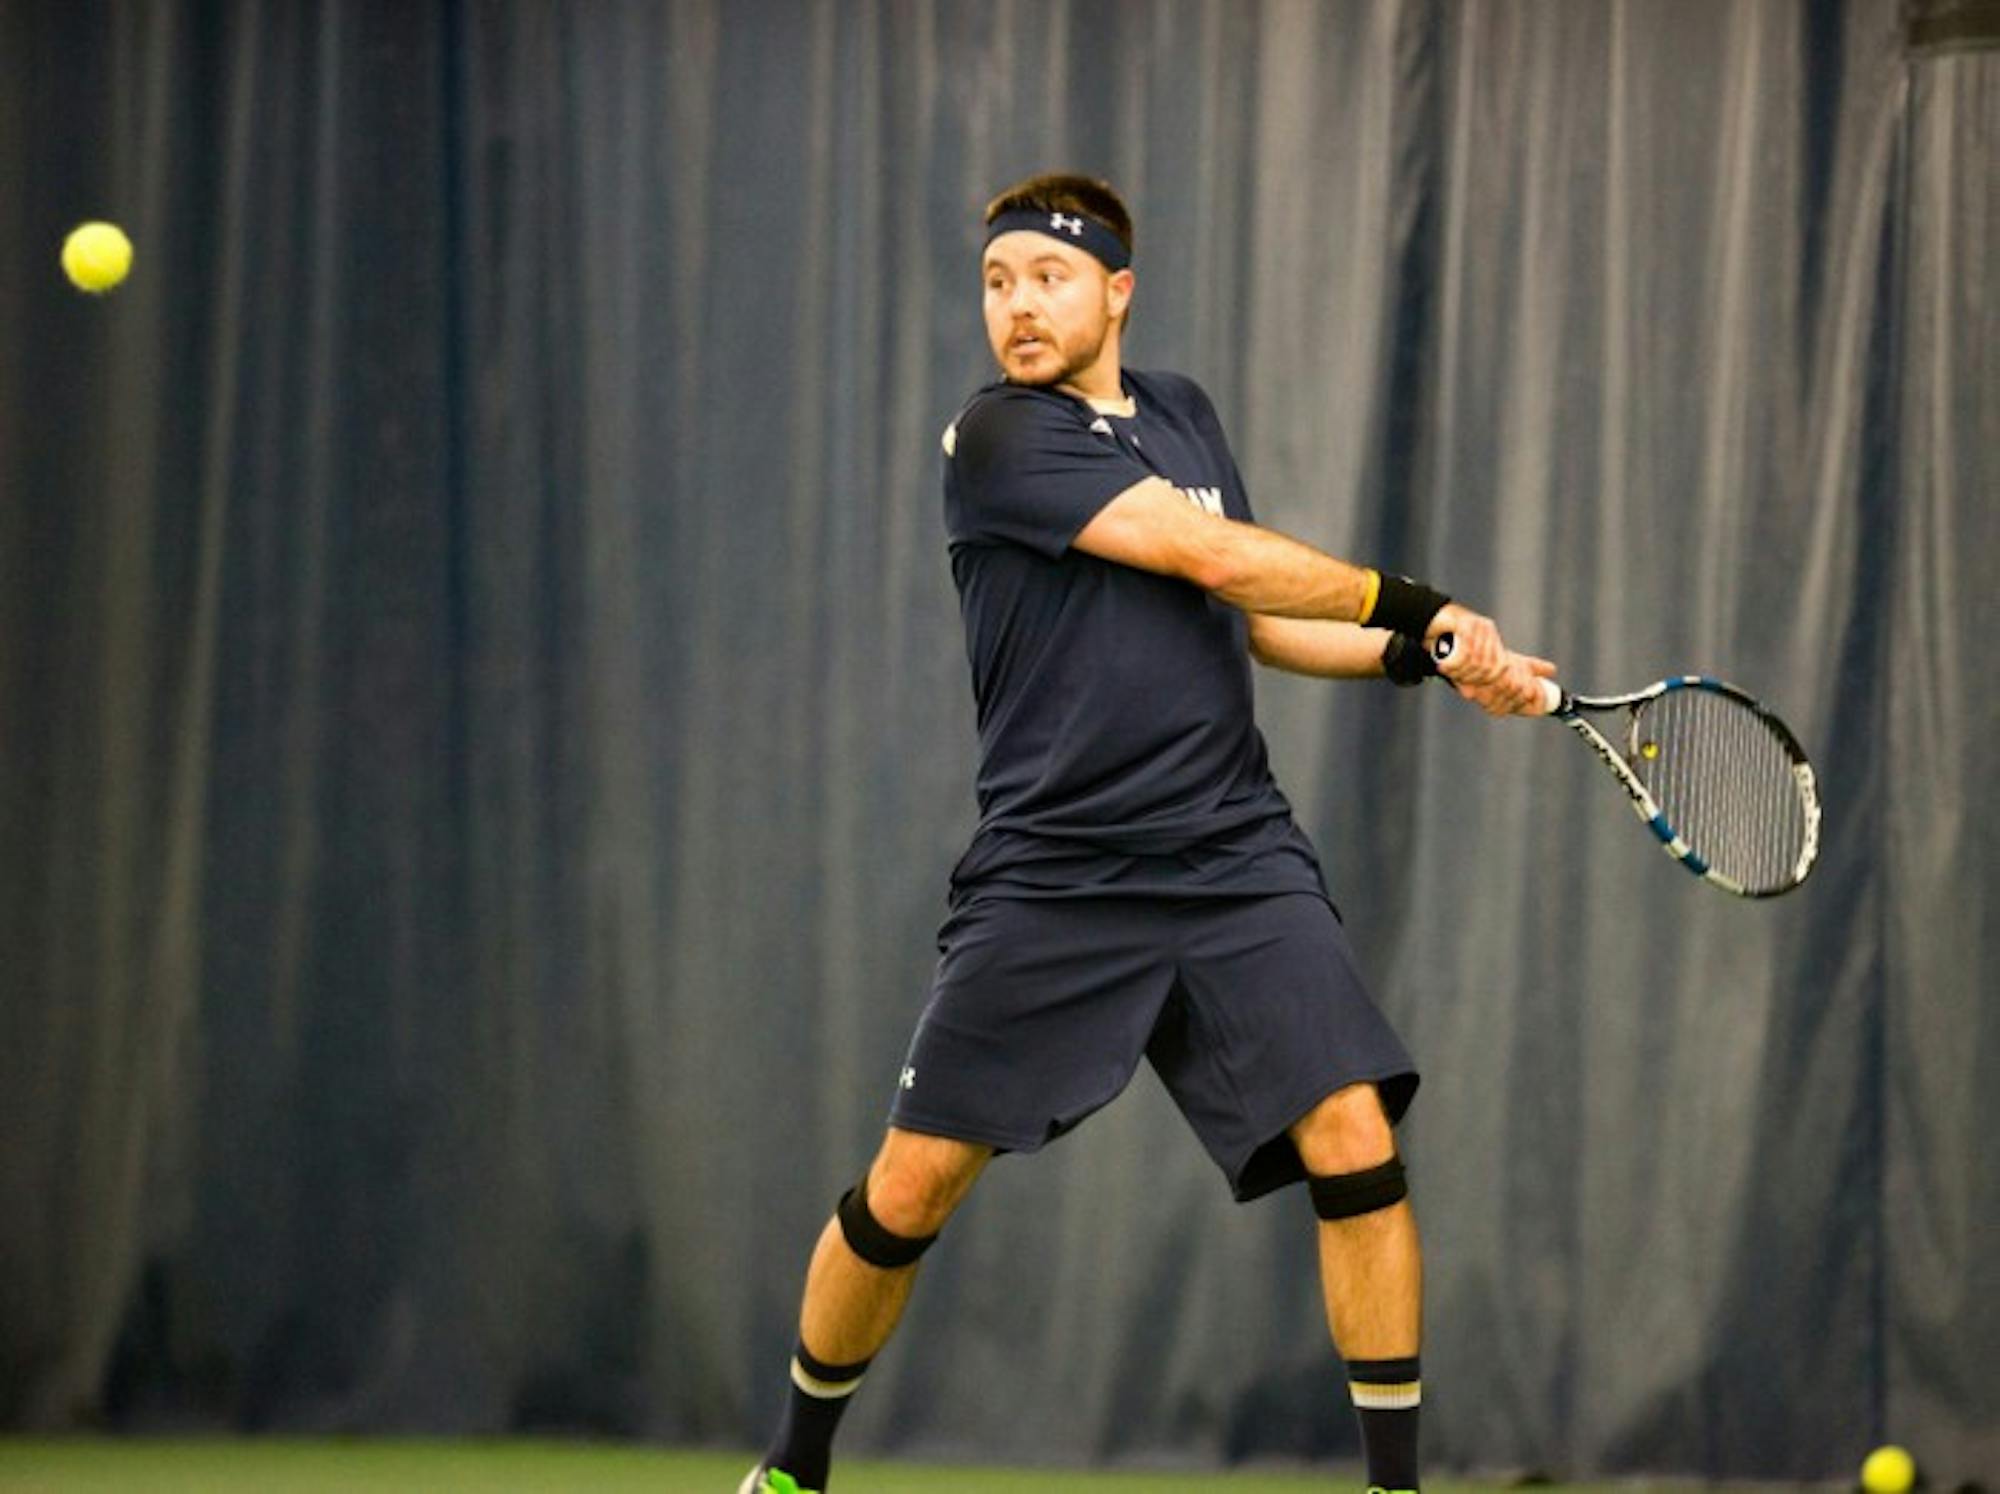 Senior Billy Pecor hits a backhand during Notre Dame's 4-3 win over Oklahoma State on Jan. 24 at Eck Tennis Pavilion.